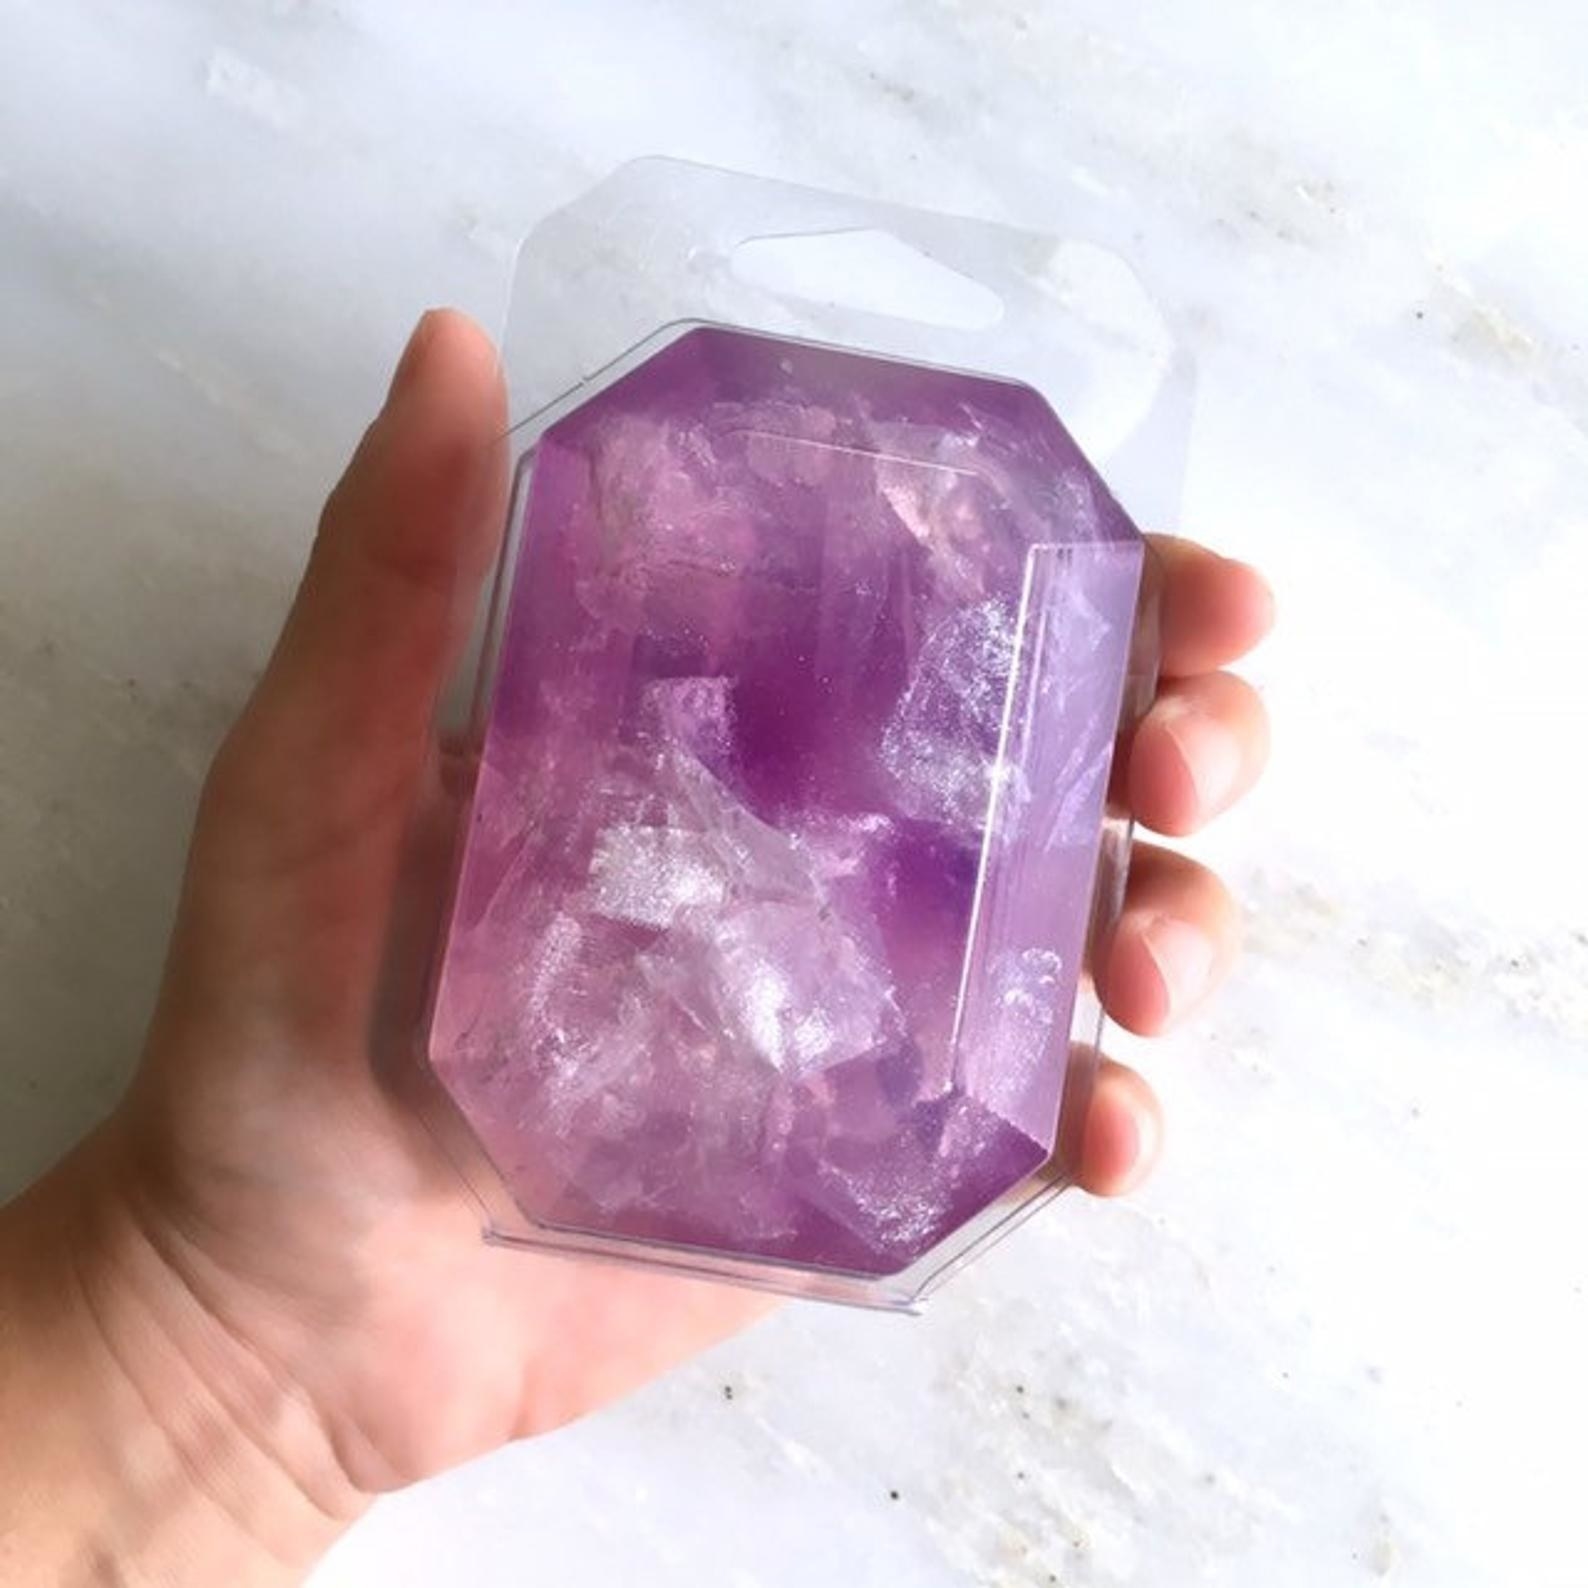 hand holding a gemstone-shaped boar of soap in purple and pink irridescent